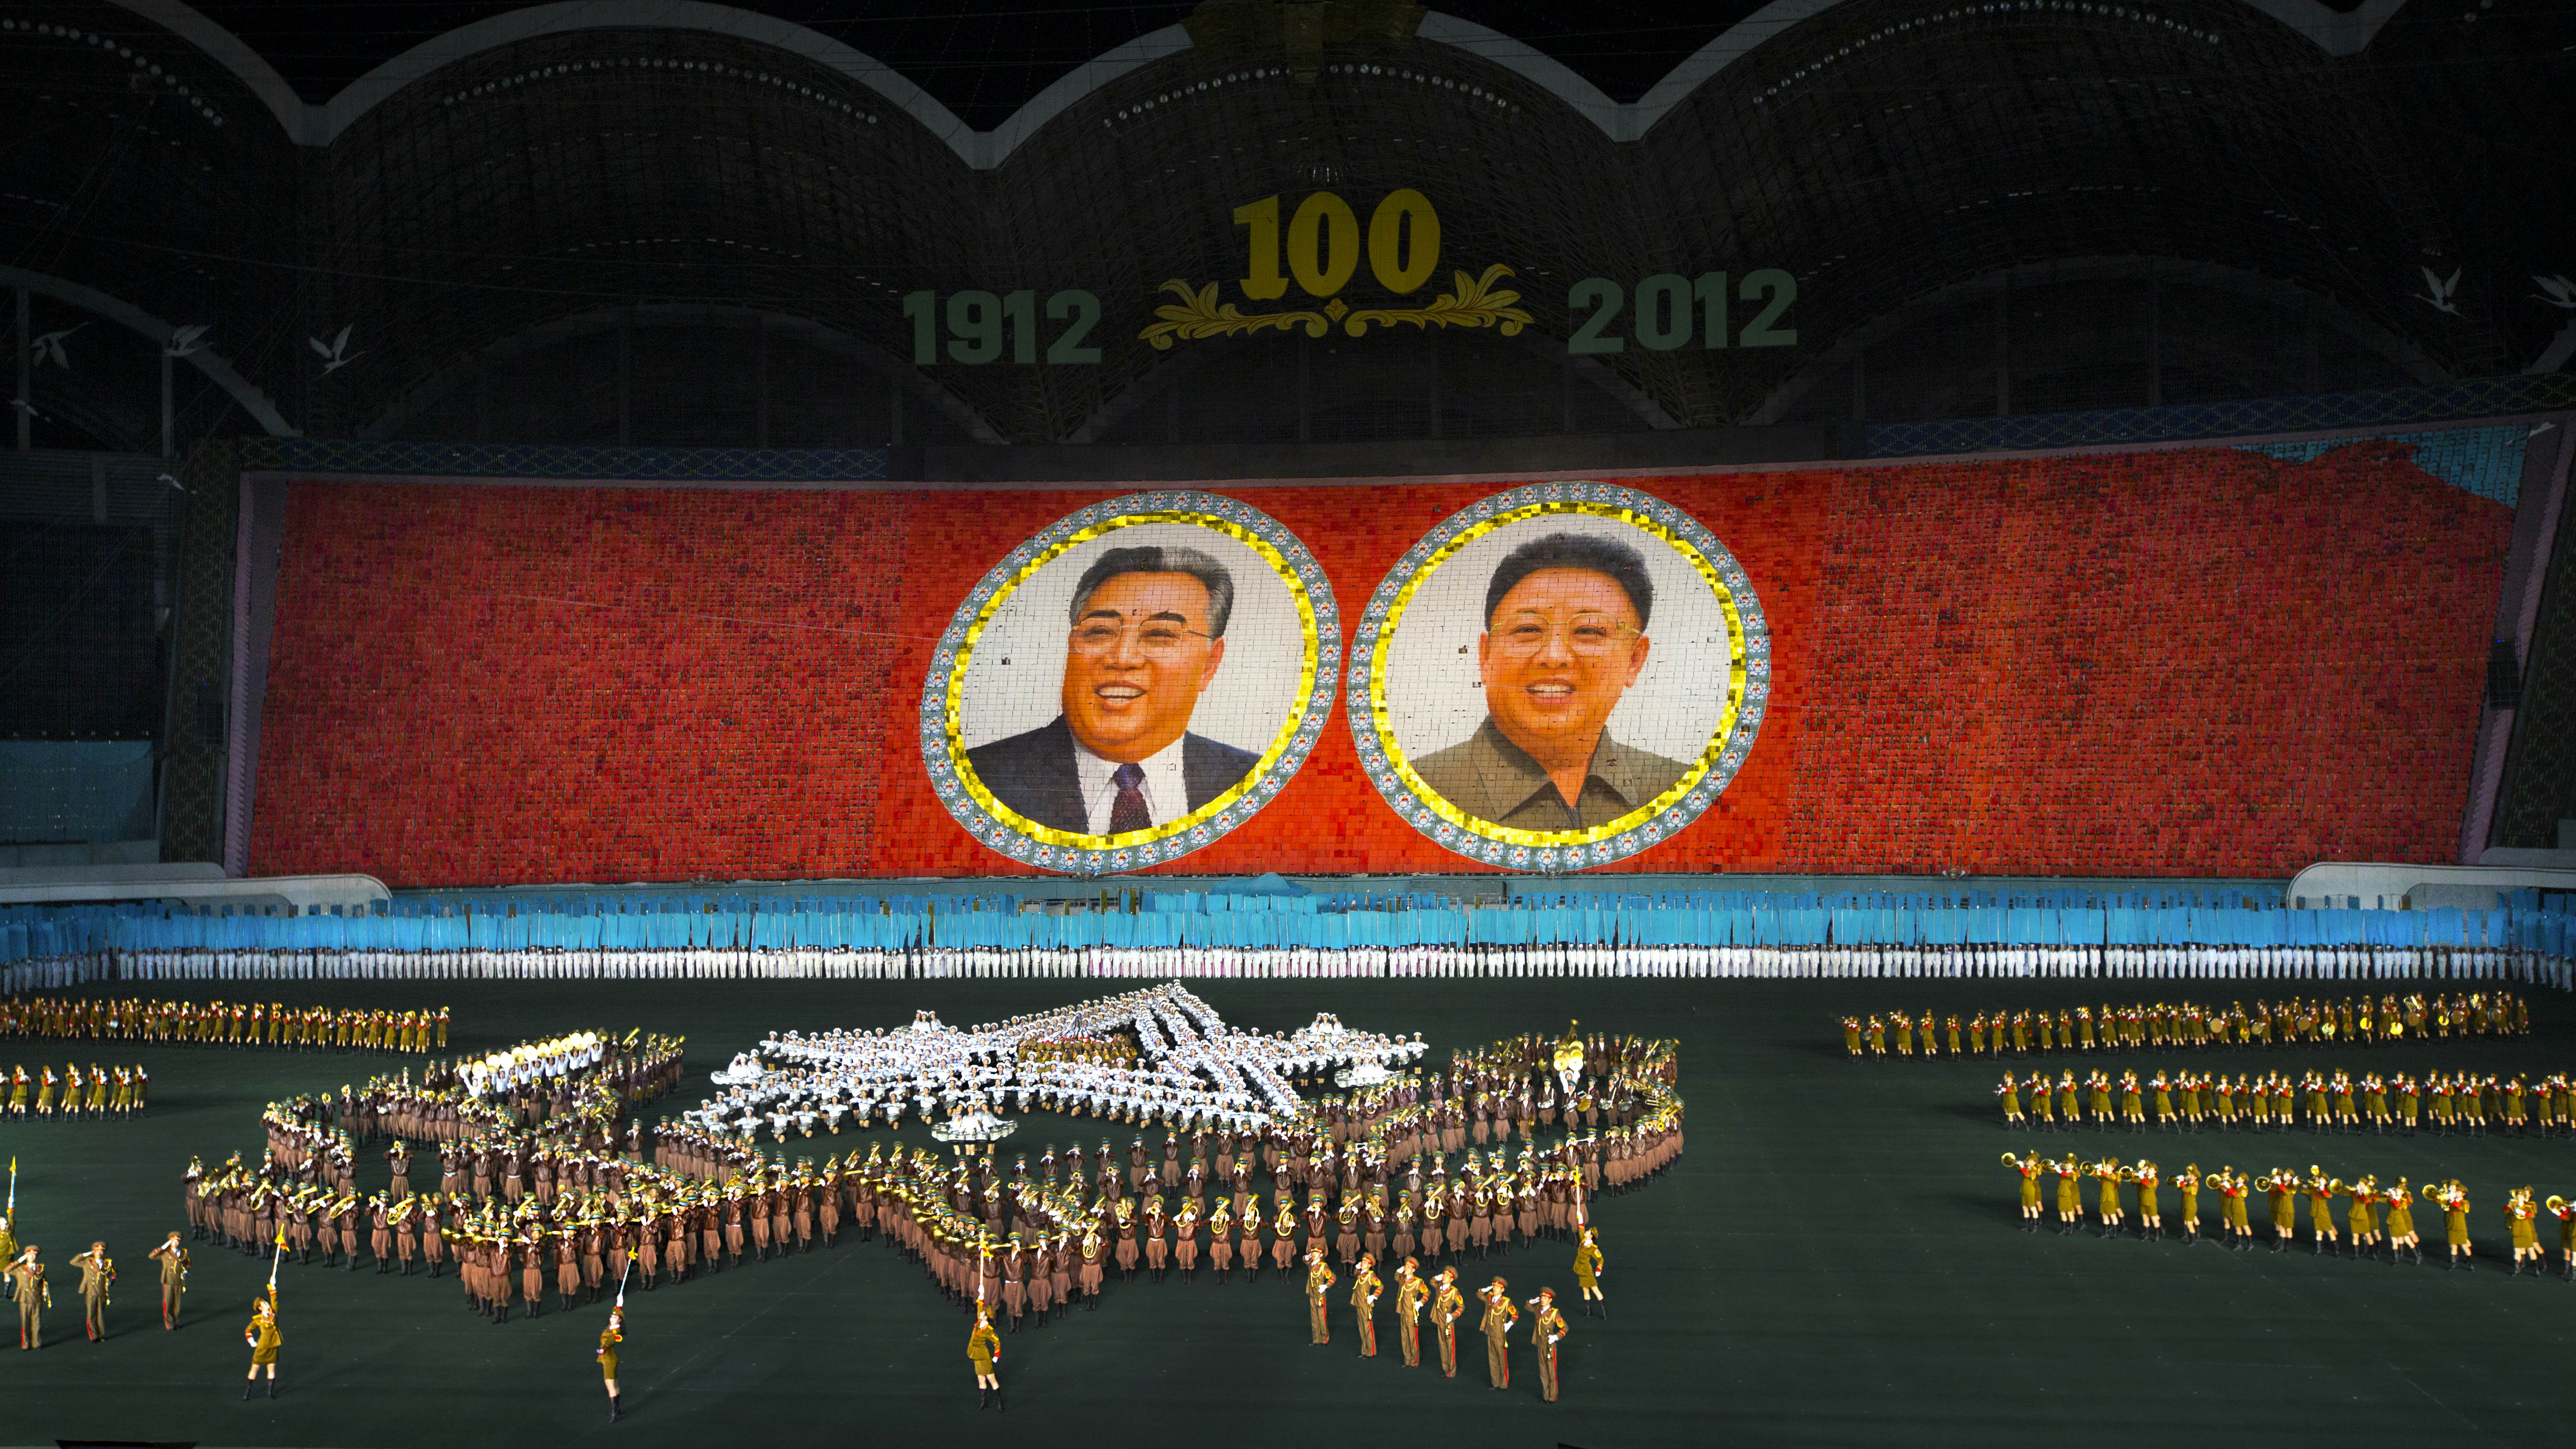 Over 100,000 performers tell tale of North Korea’s history at Mass Games in Pyongyang May Day Stadium.